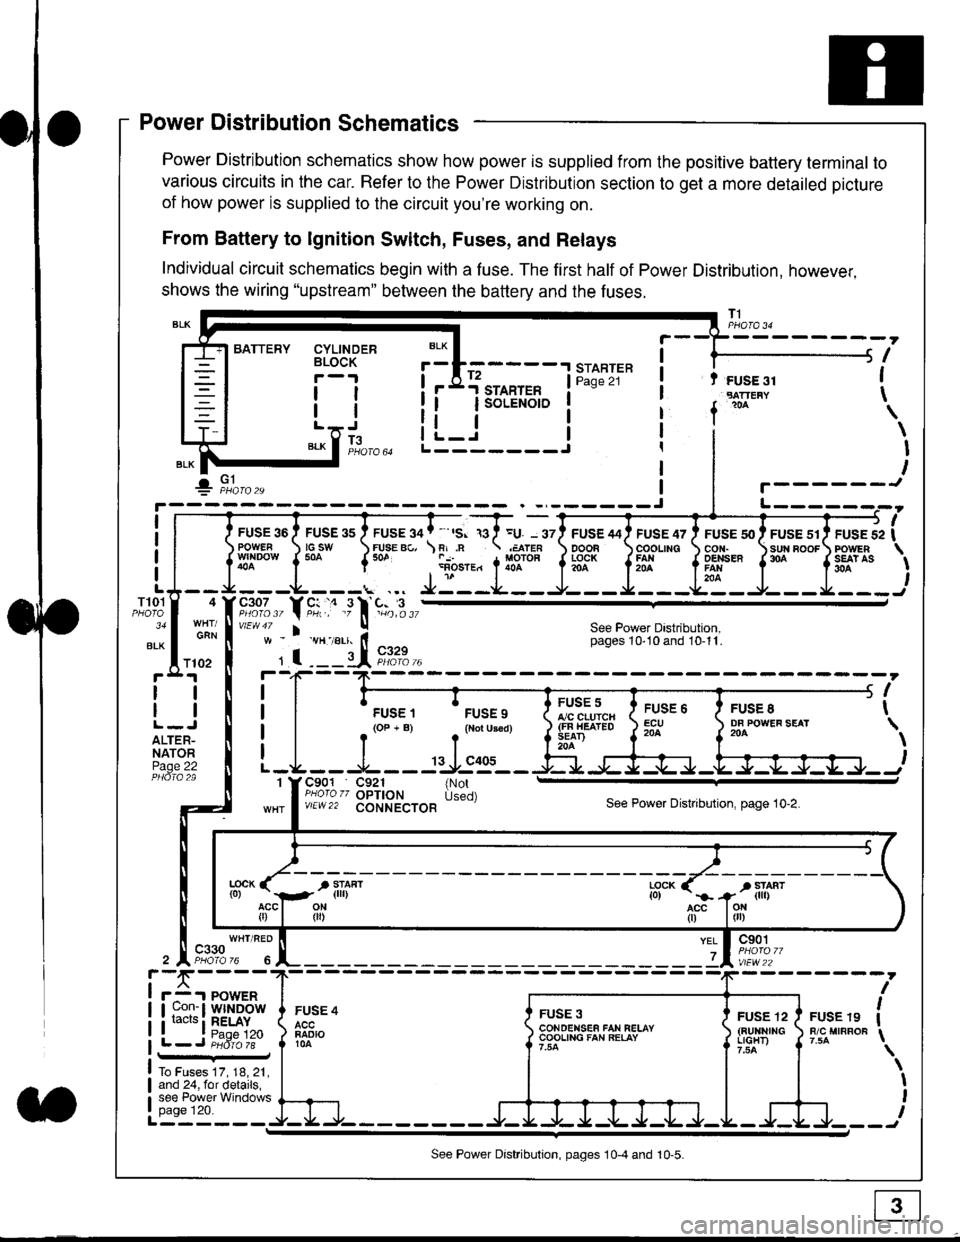 HONDA CIVIC 1999 6.G Workshop Manual Power Distribution Schematics
Power Distribution schematics show how power is supplied from the positive battery terminal to
various circuits in the car. Refer to the Power Distribution section to get